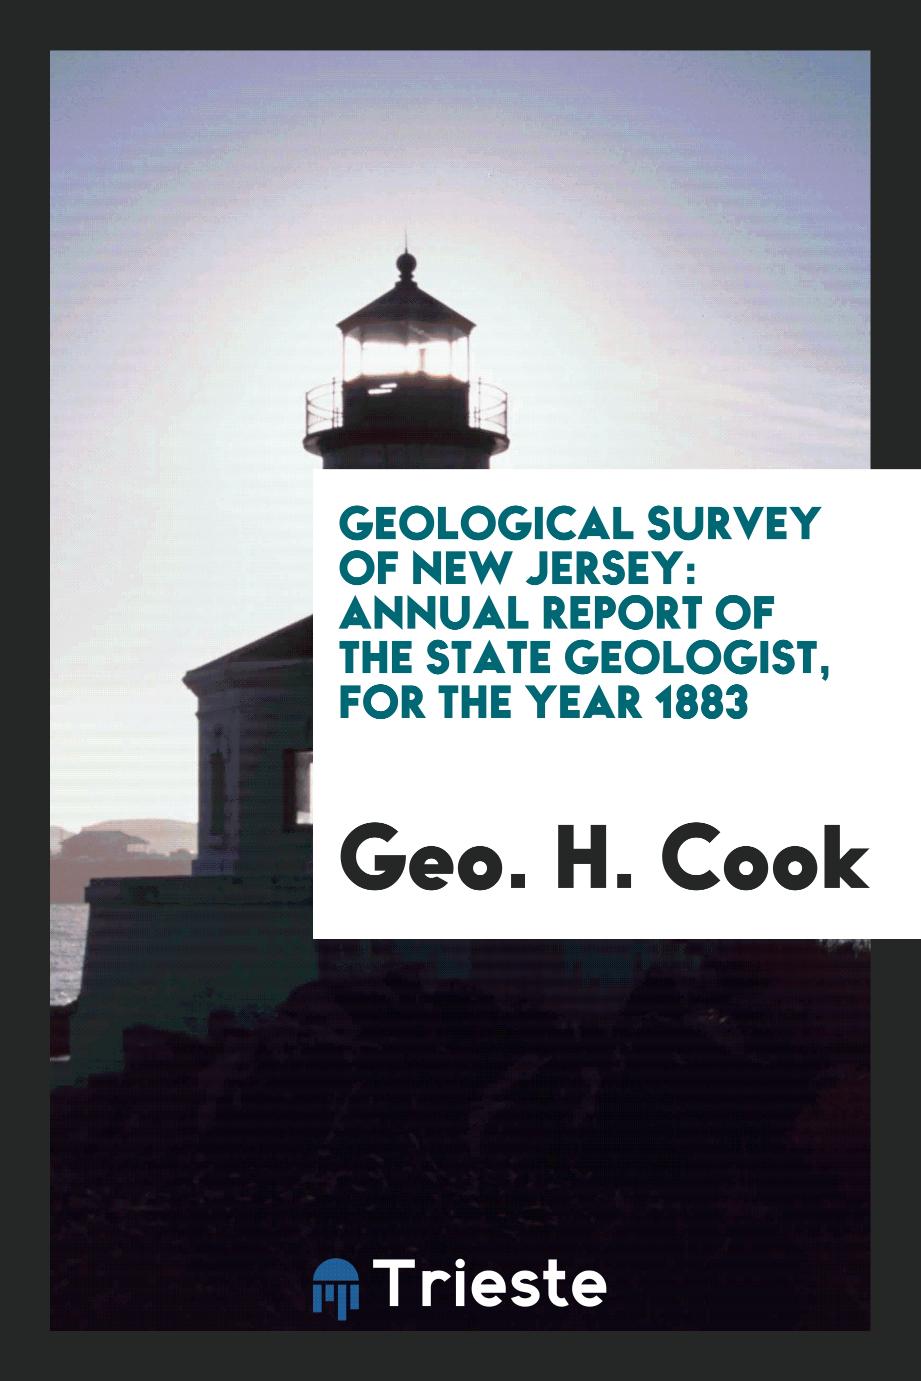 Geological Survey of New Jersey: Annual Report of the State Geologist, for the Year 1883